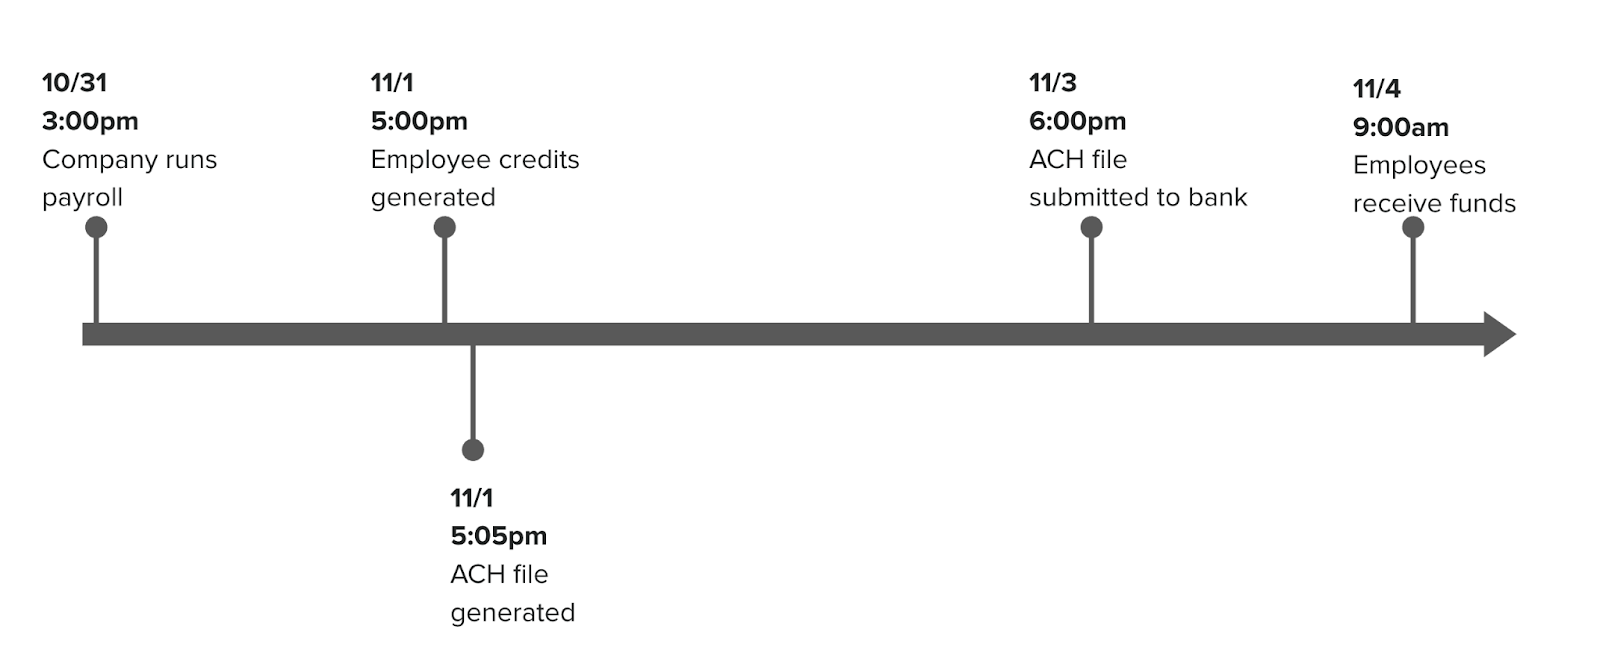 Timeline showing when ACH entries are generated and submitted